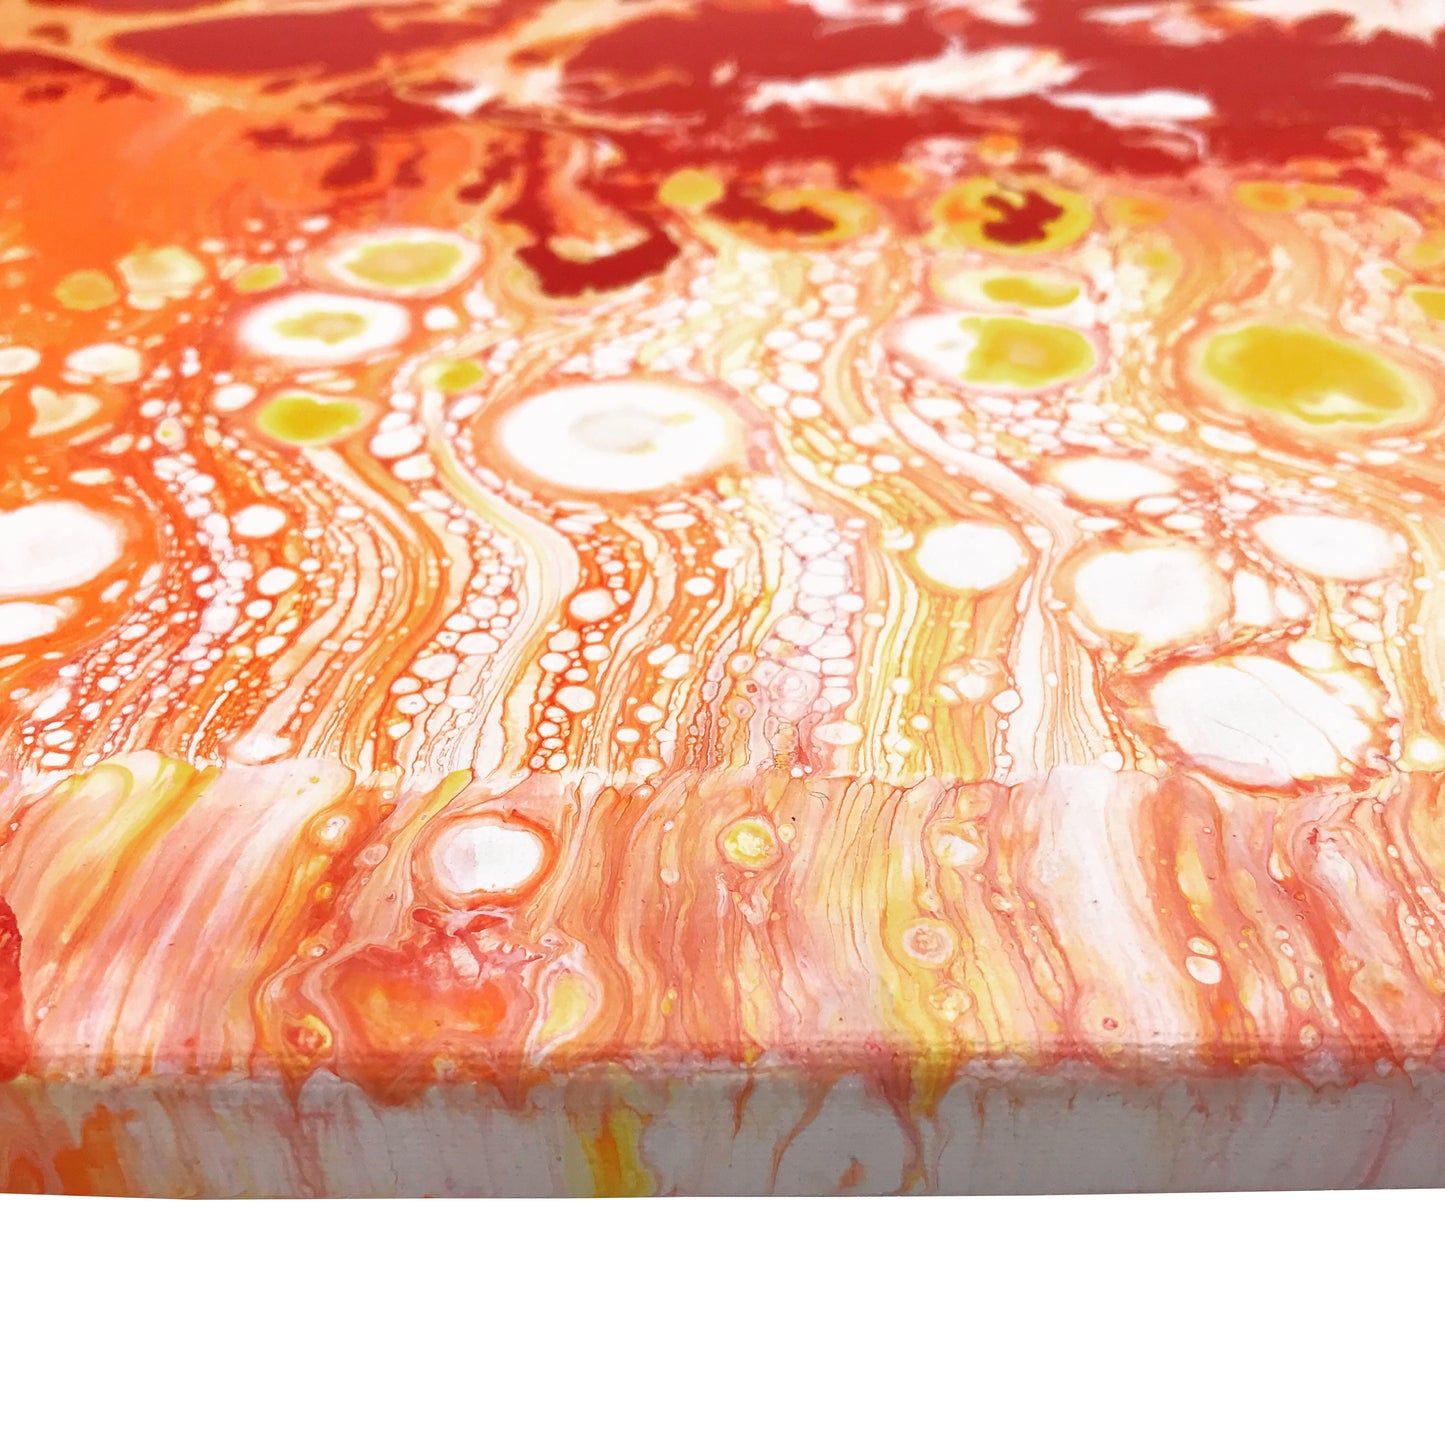 Original Fluid Art Acrylic Painting in Red, Orange, Yellow and White, Abstract Art